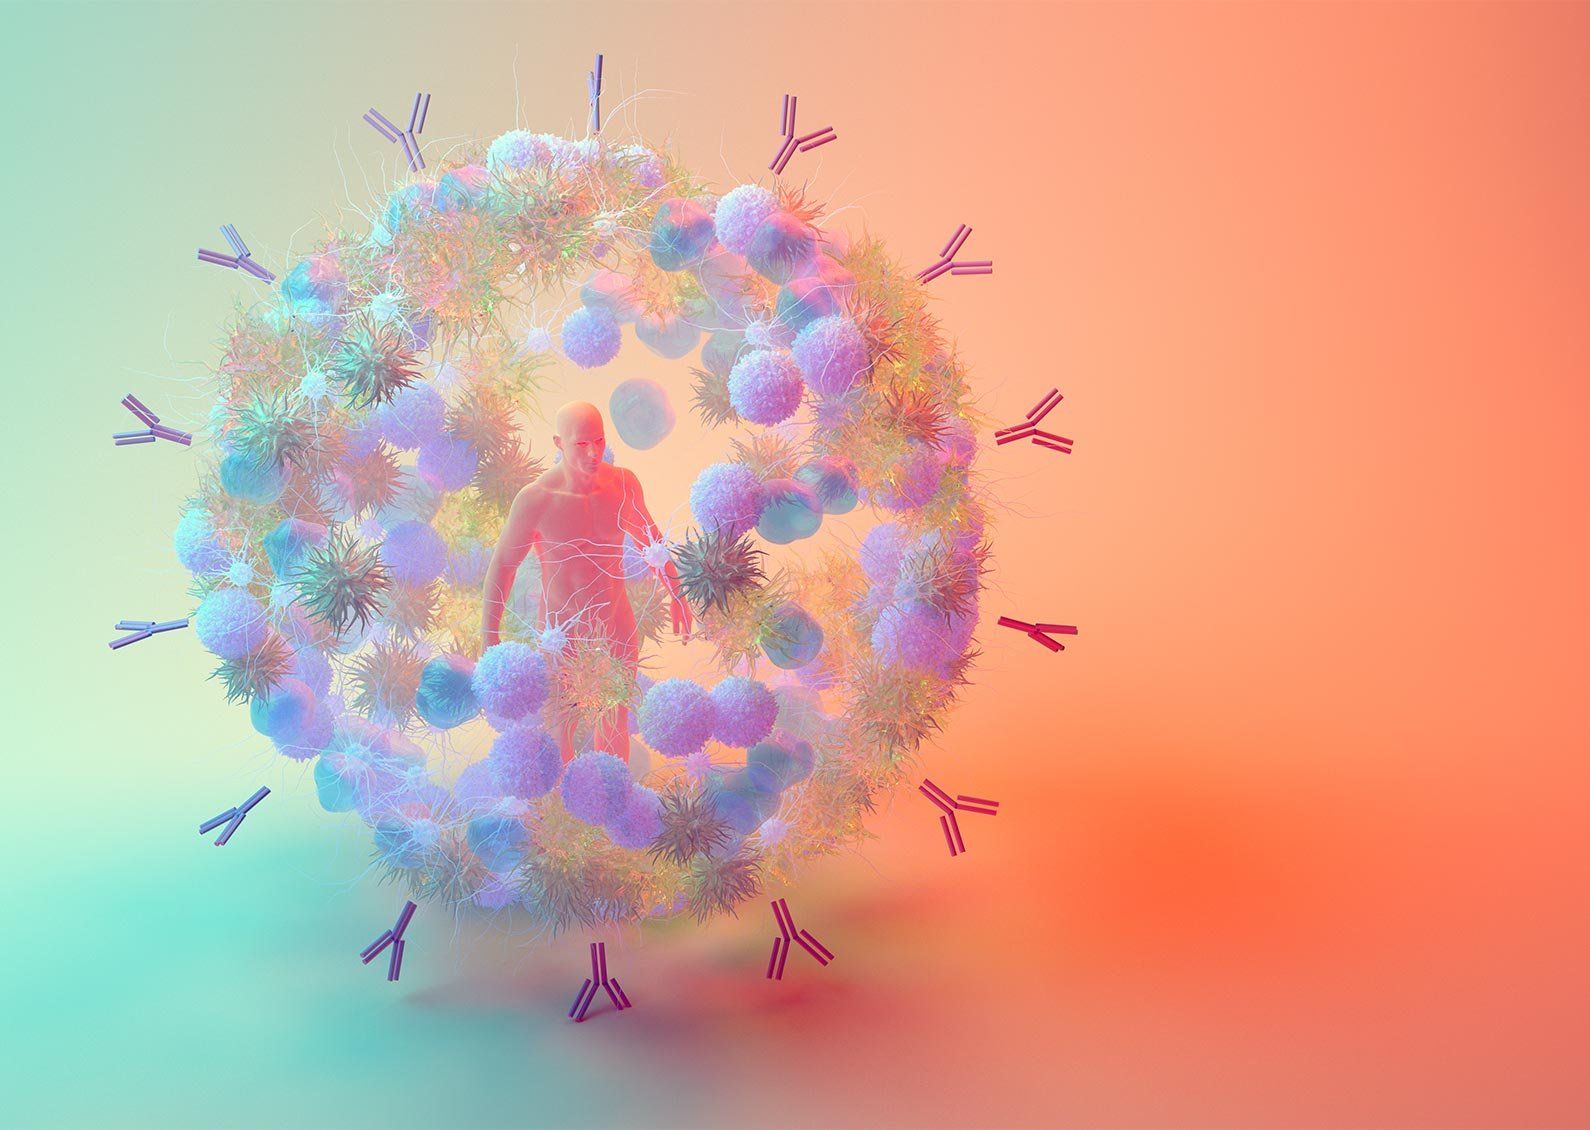 3-D illustration of a man surrounded by a sphere of immune cells and antibodies, resembling a coronavirus.